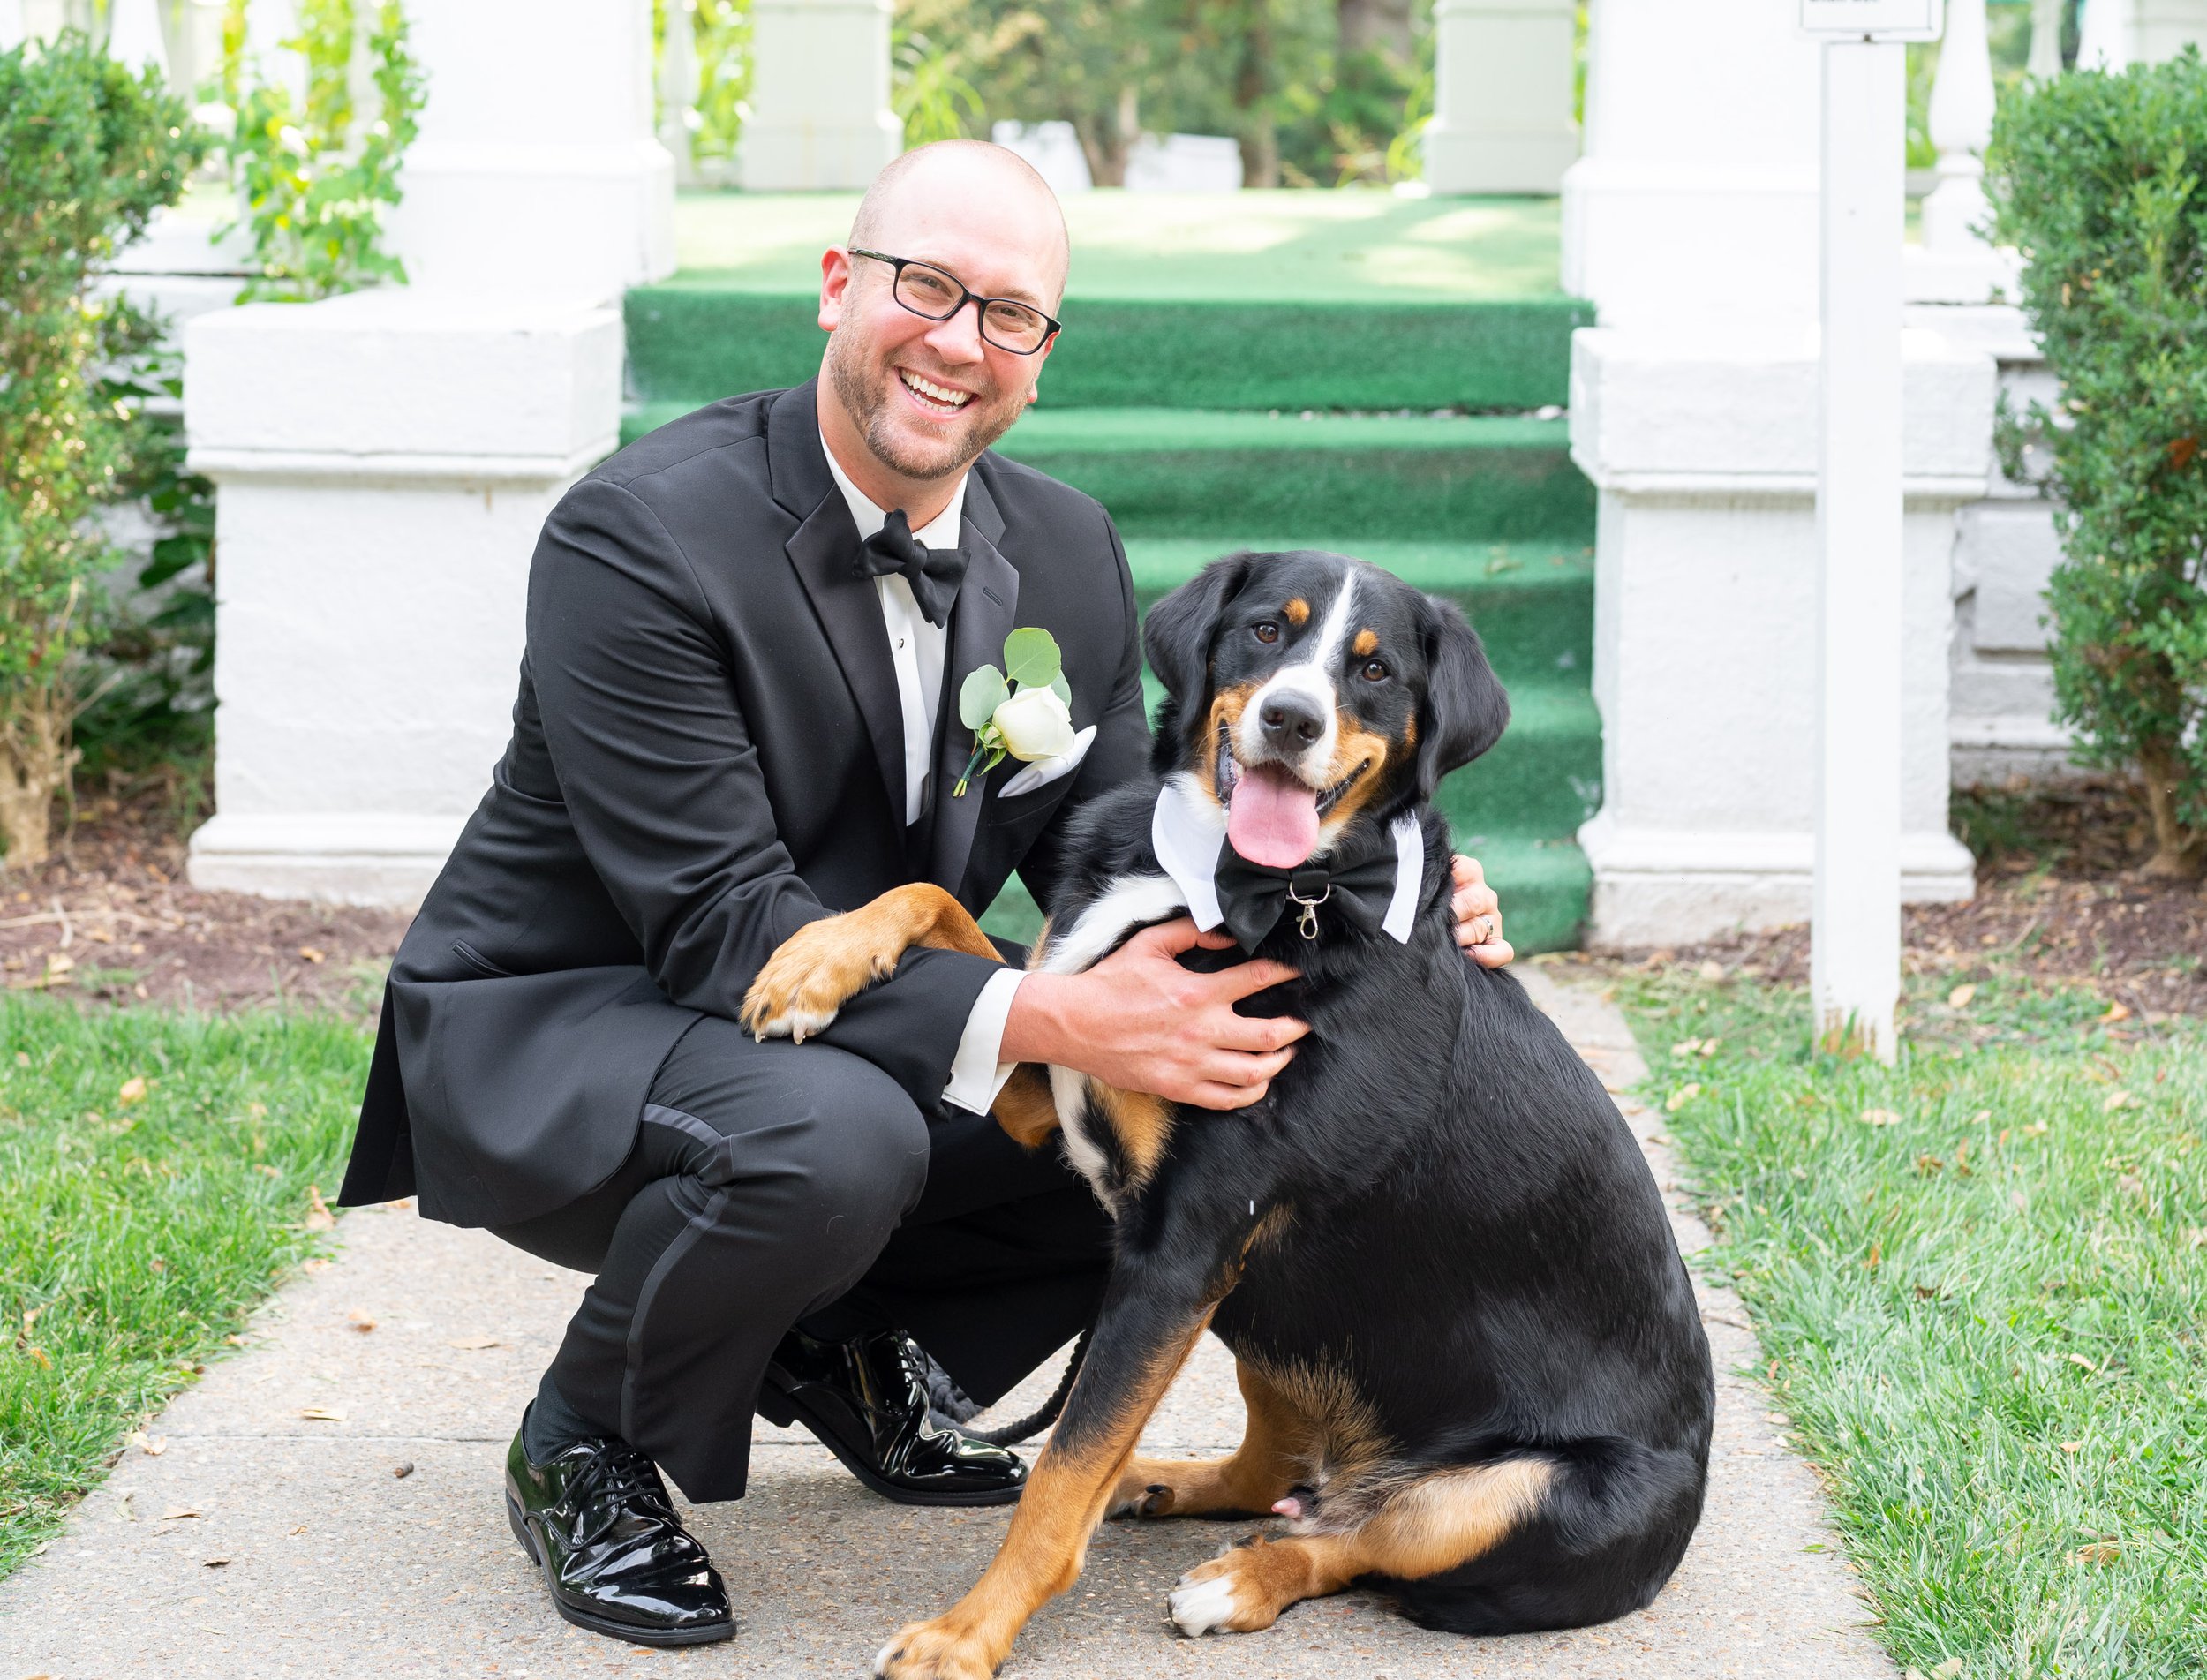 Groom sitting with his dog with paw over grooms arm in wedding tuxedo